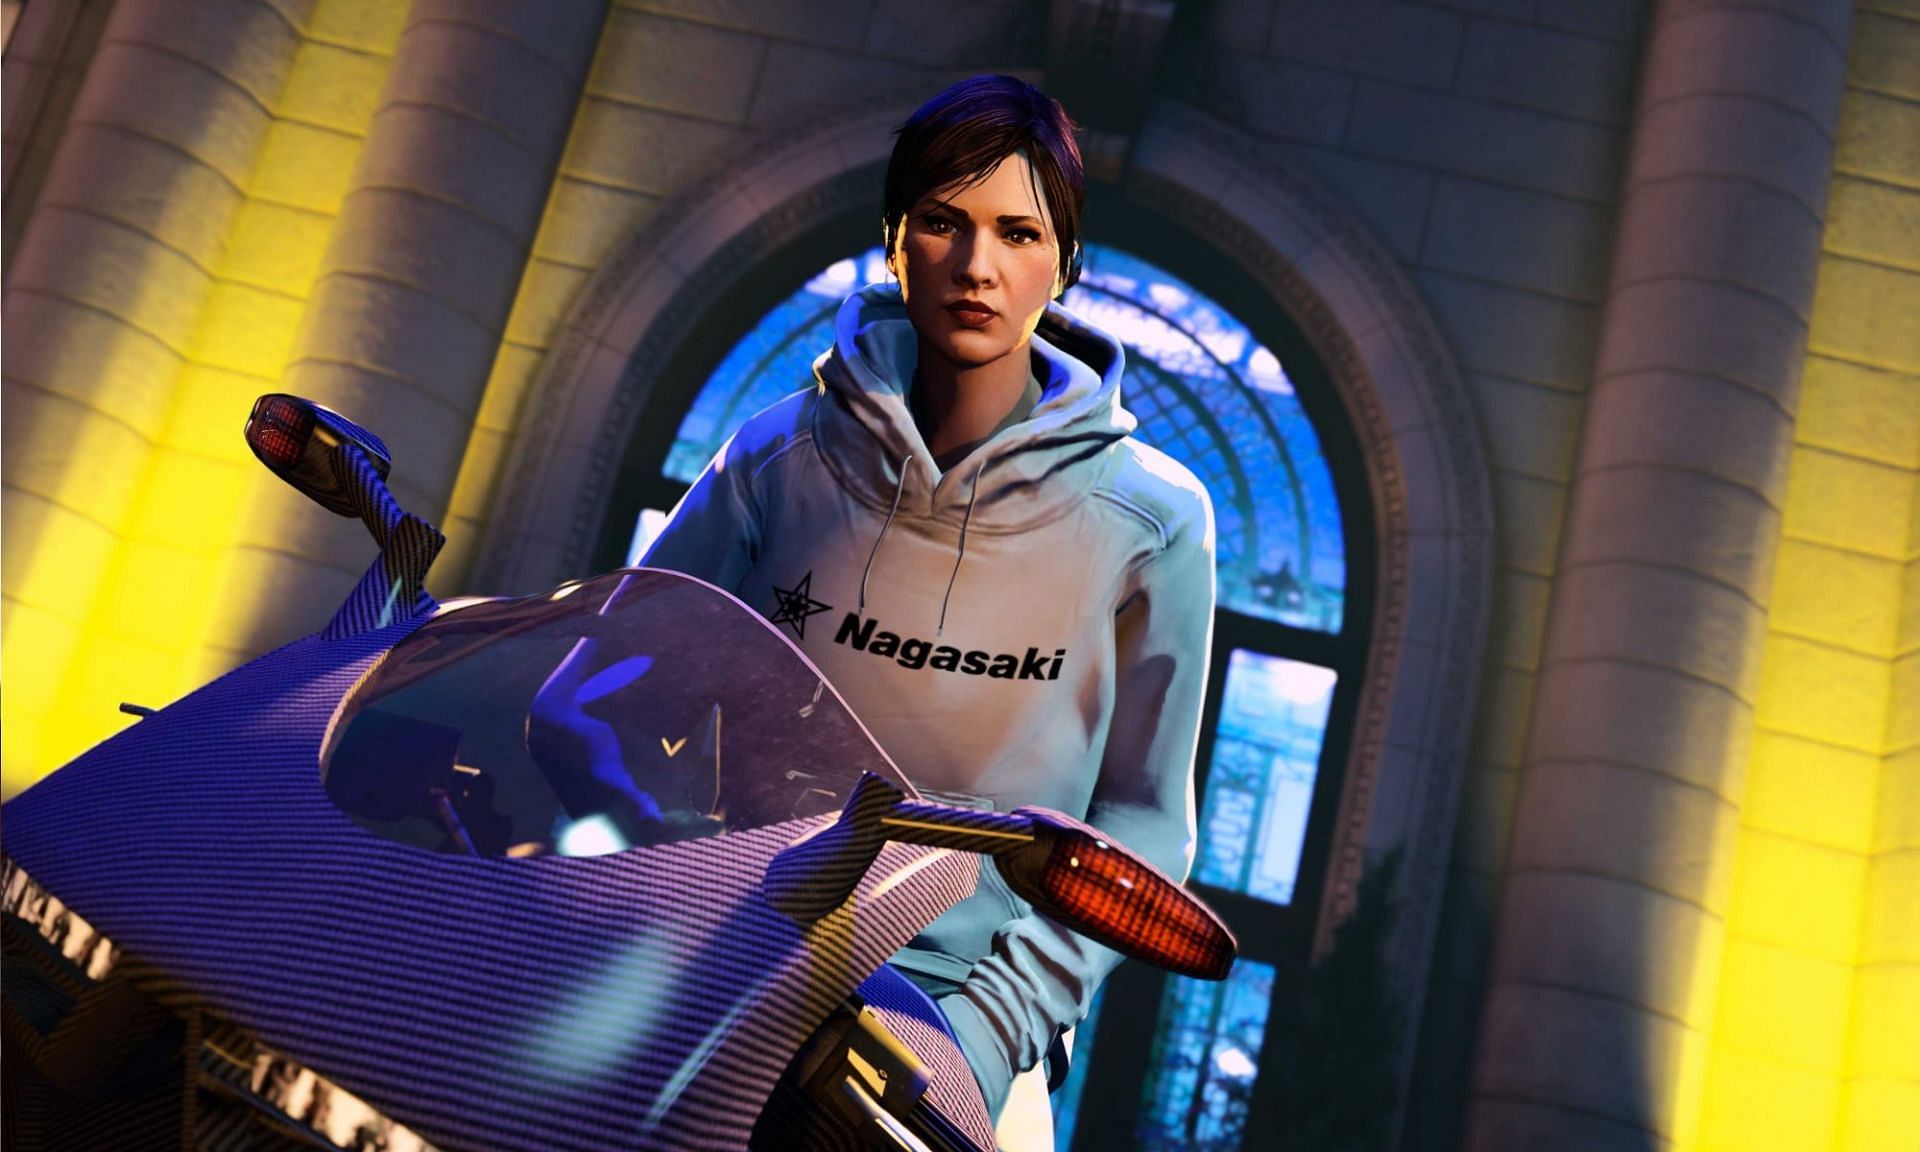 Select players can rock this style in GTA Online (Image via Rockstar Games)